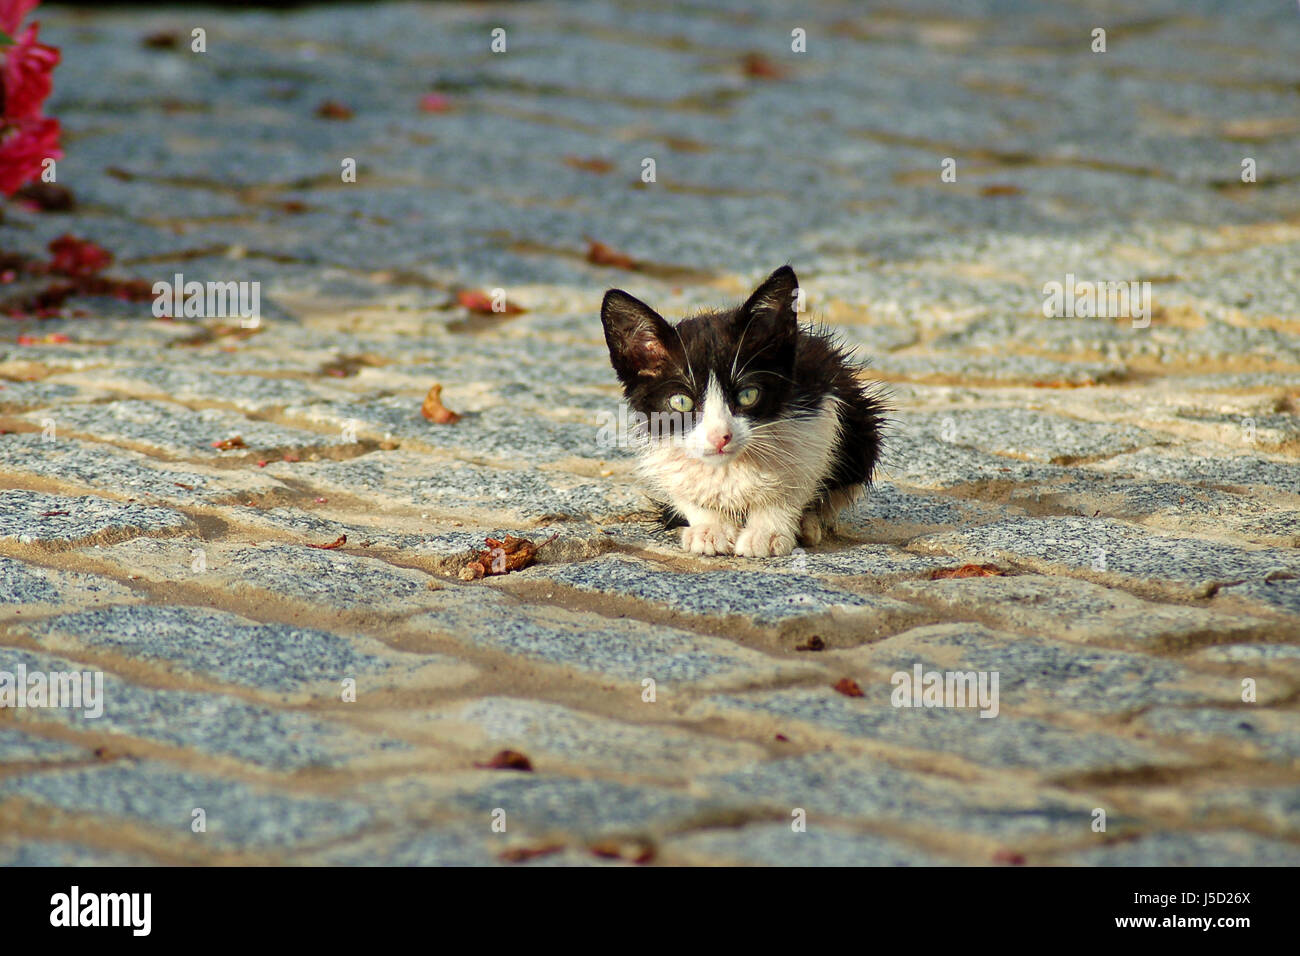 animal lost spain small tiny little short yard animal protection mosque Stock Photo